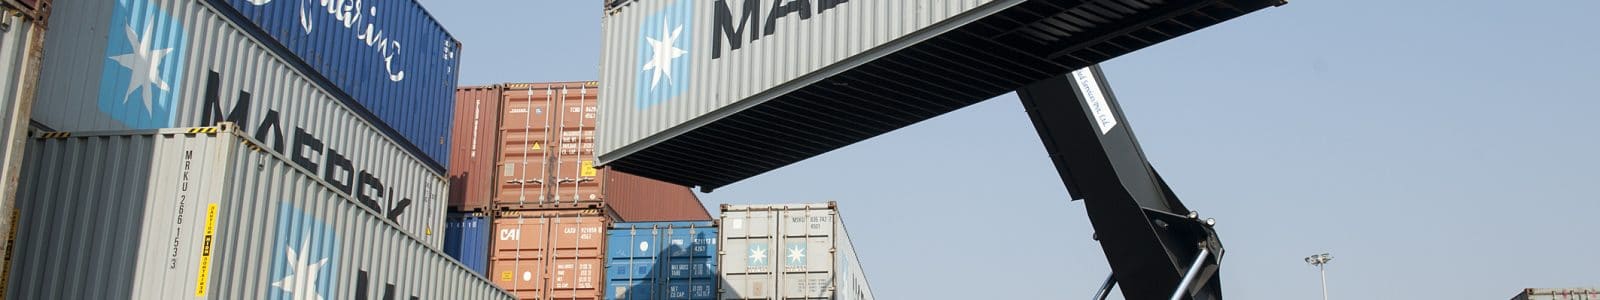 Maersk joins BoxTech container database